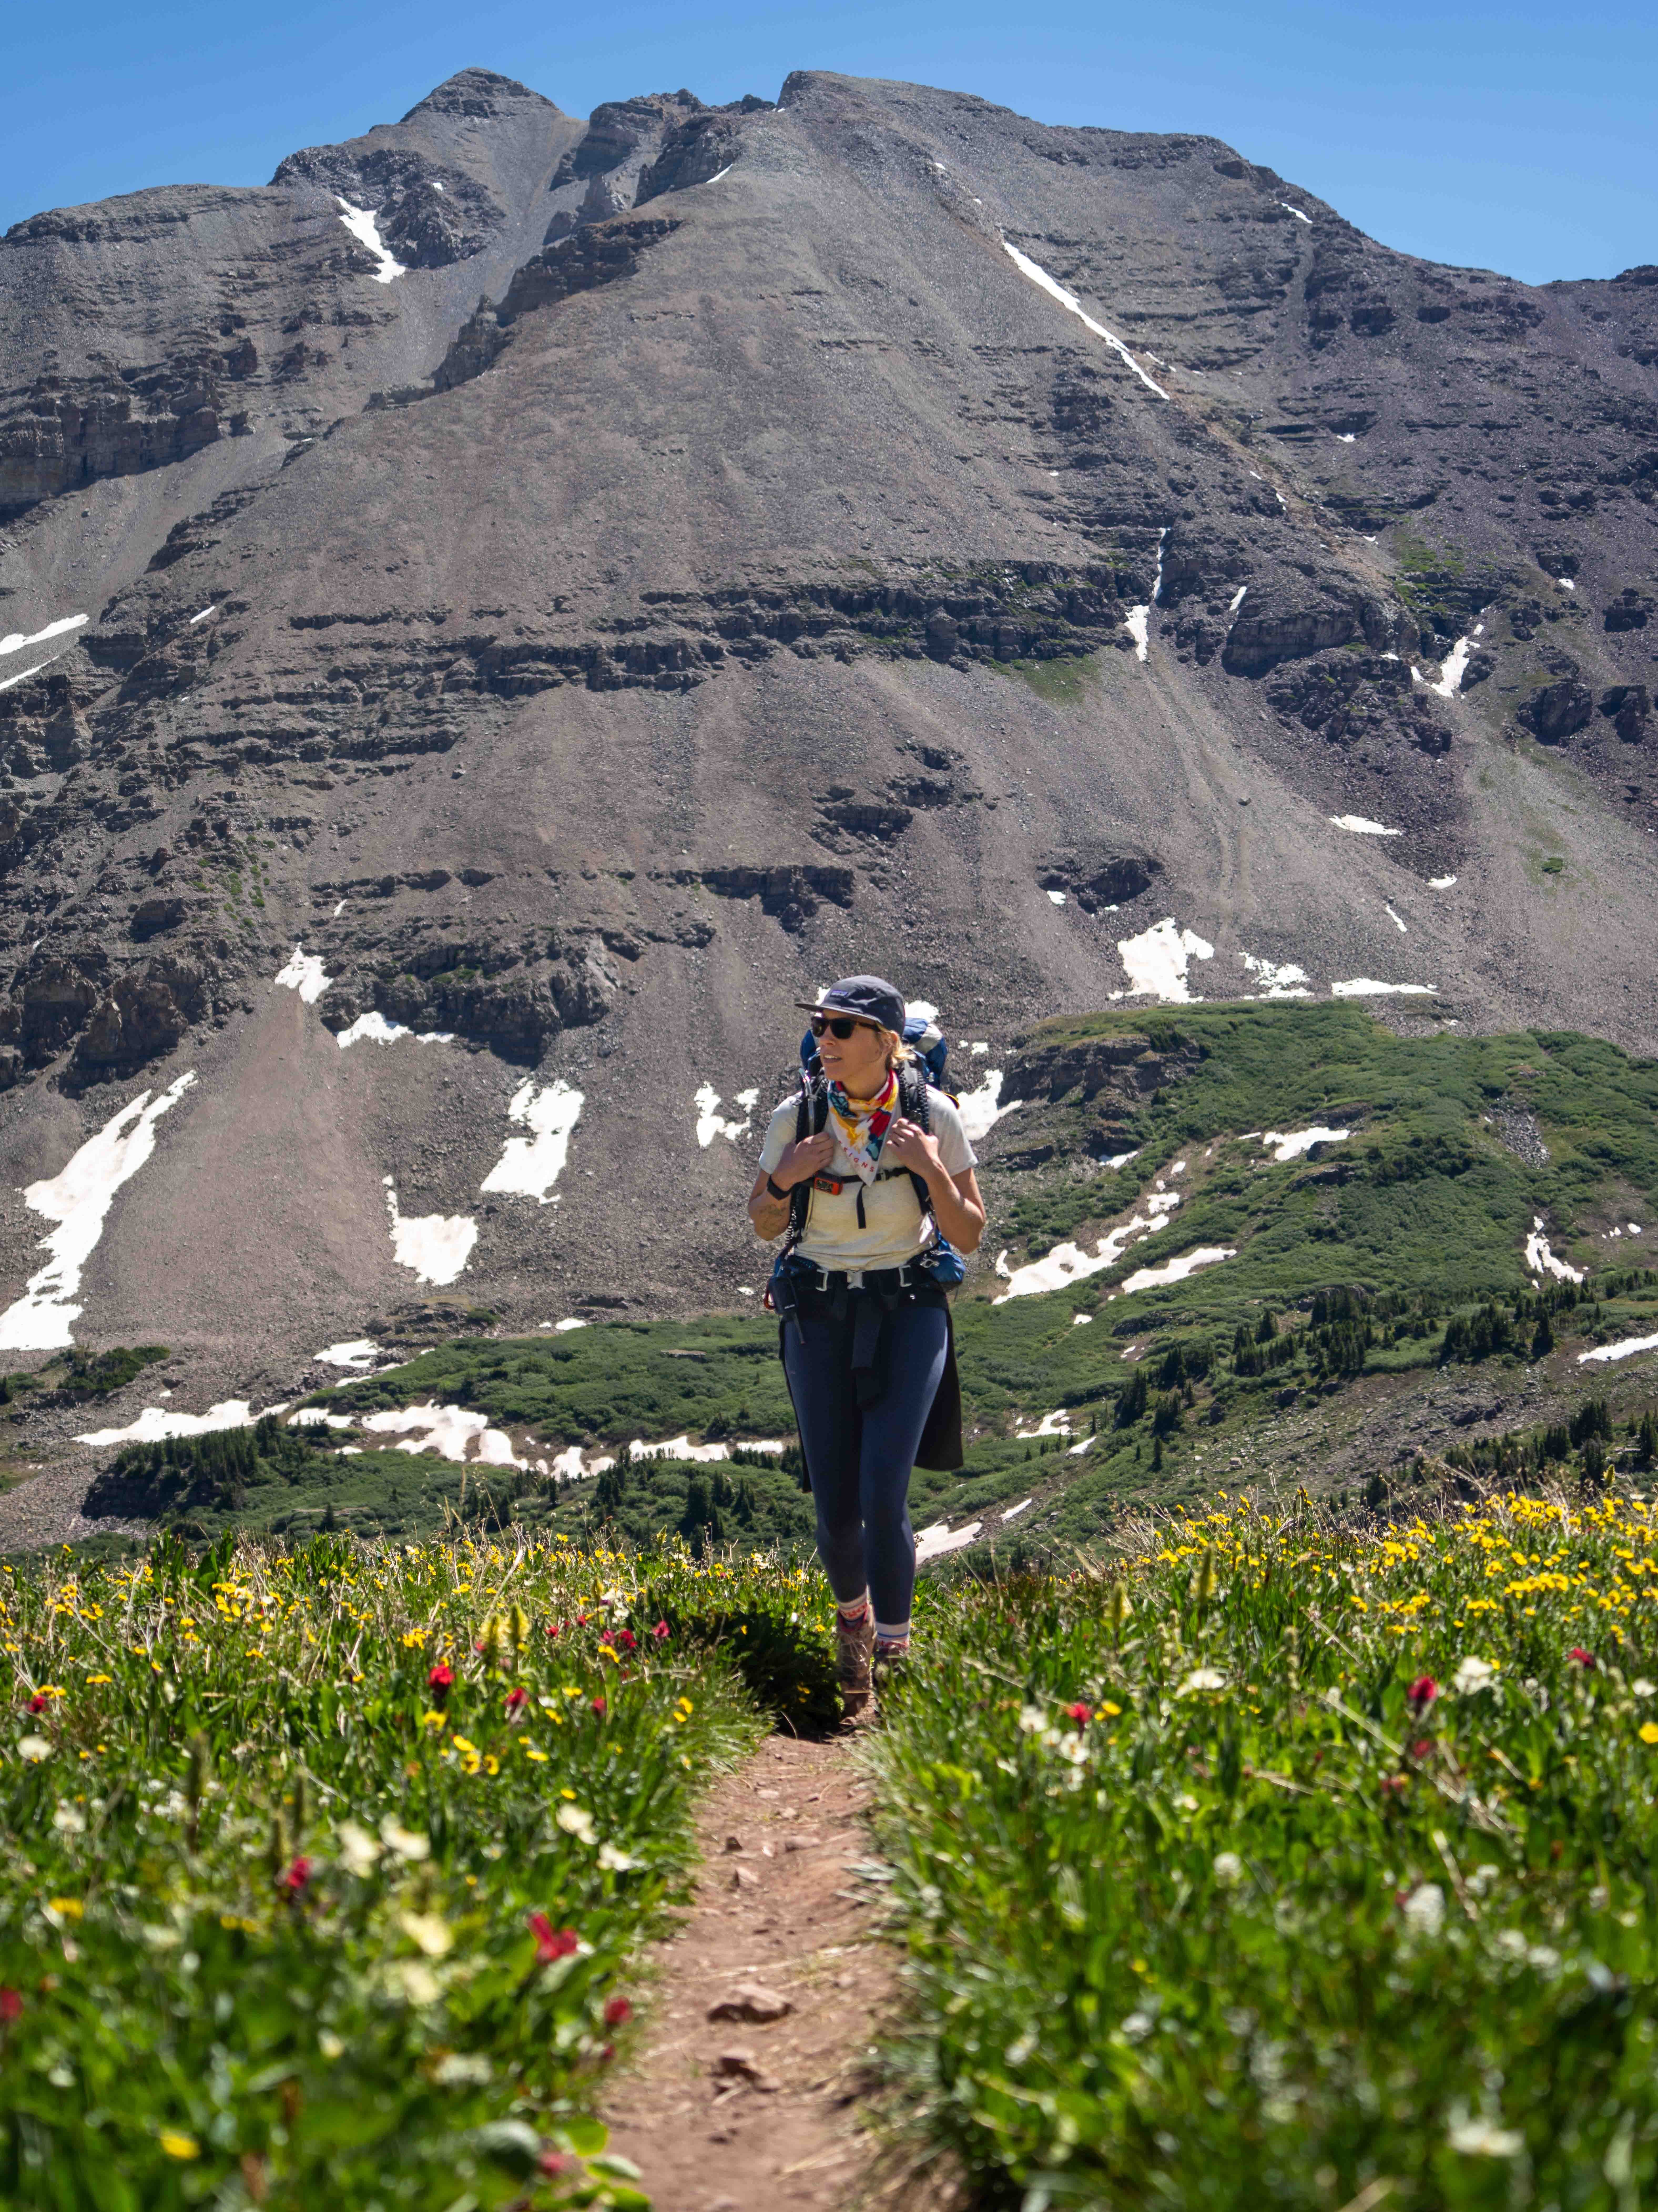 Hilary Lex hikes up a trail surrounded by wildflowers on the Conundrum Creek Trail in Colorado. A mountain towers behind her.